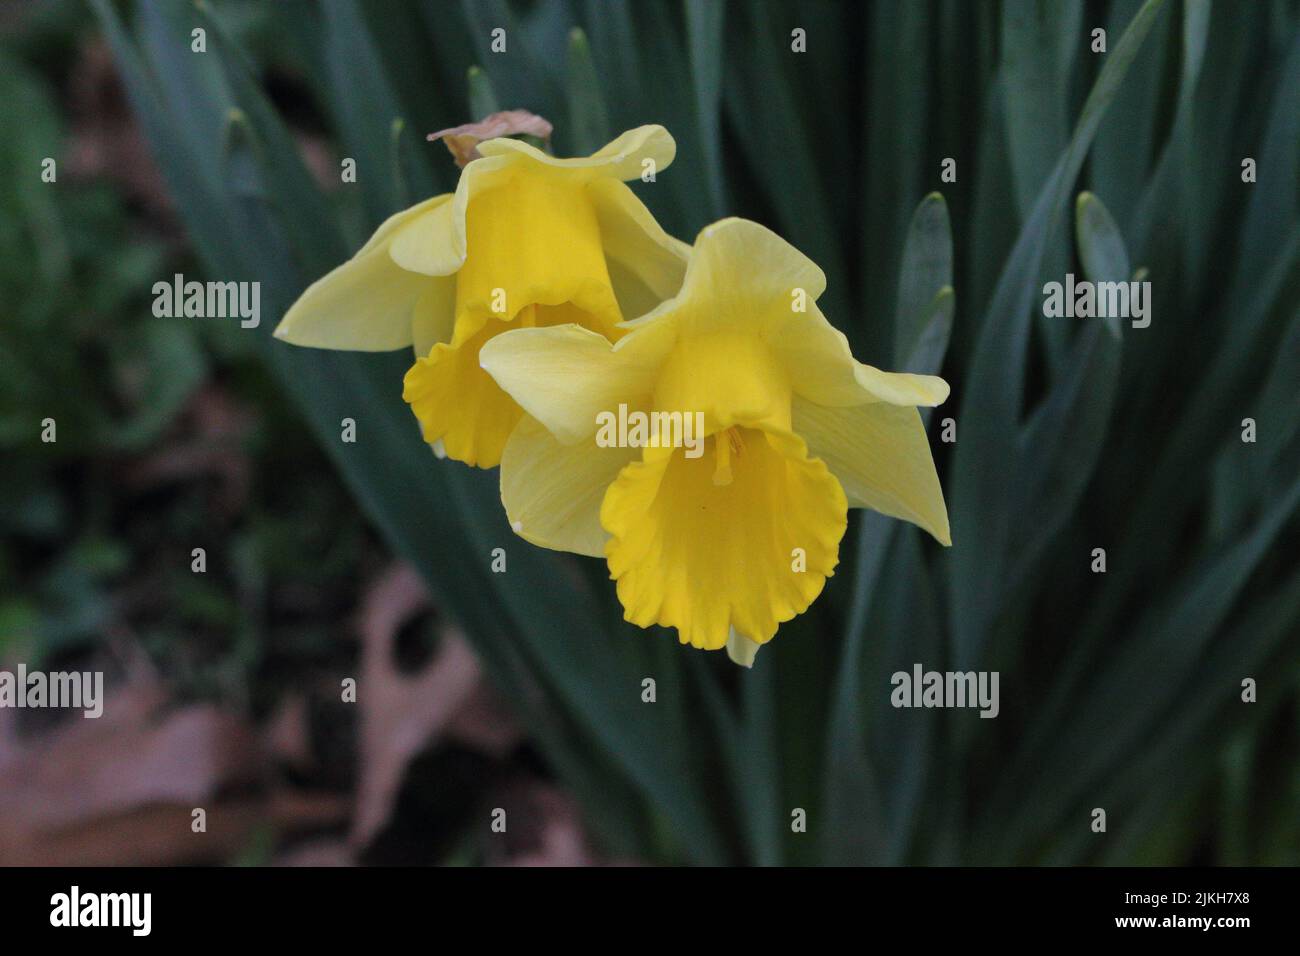 A closeup shot of two blooming yellow daffodils Stock Photo